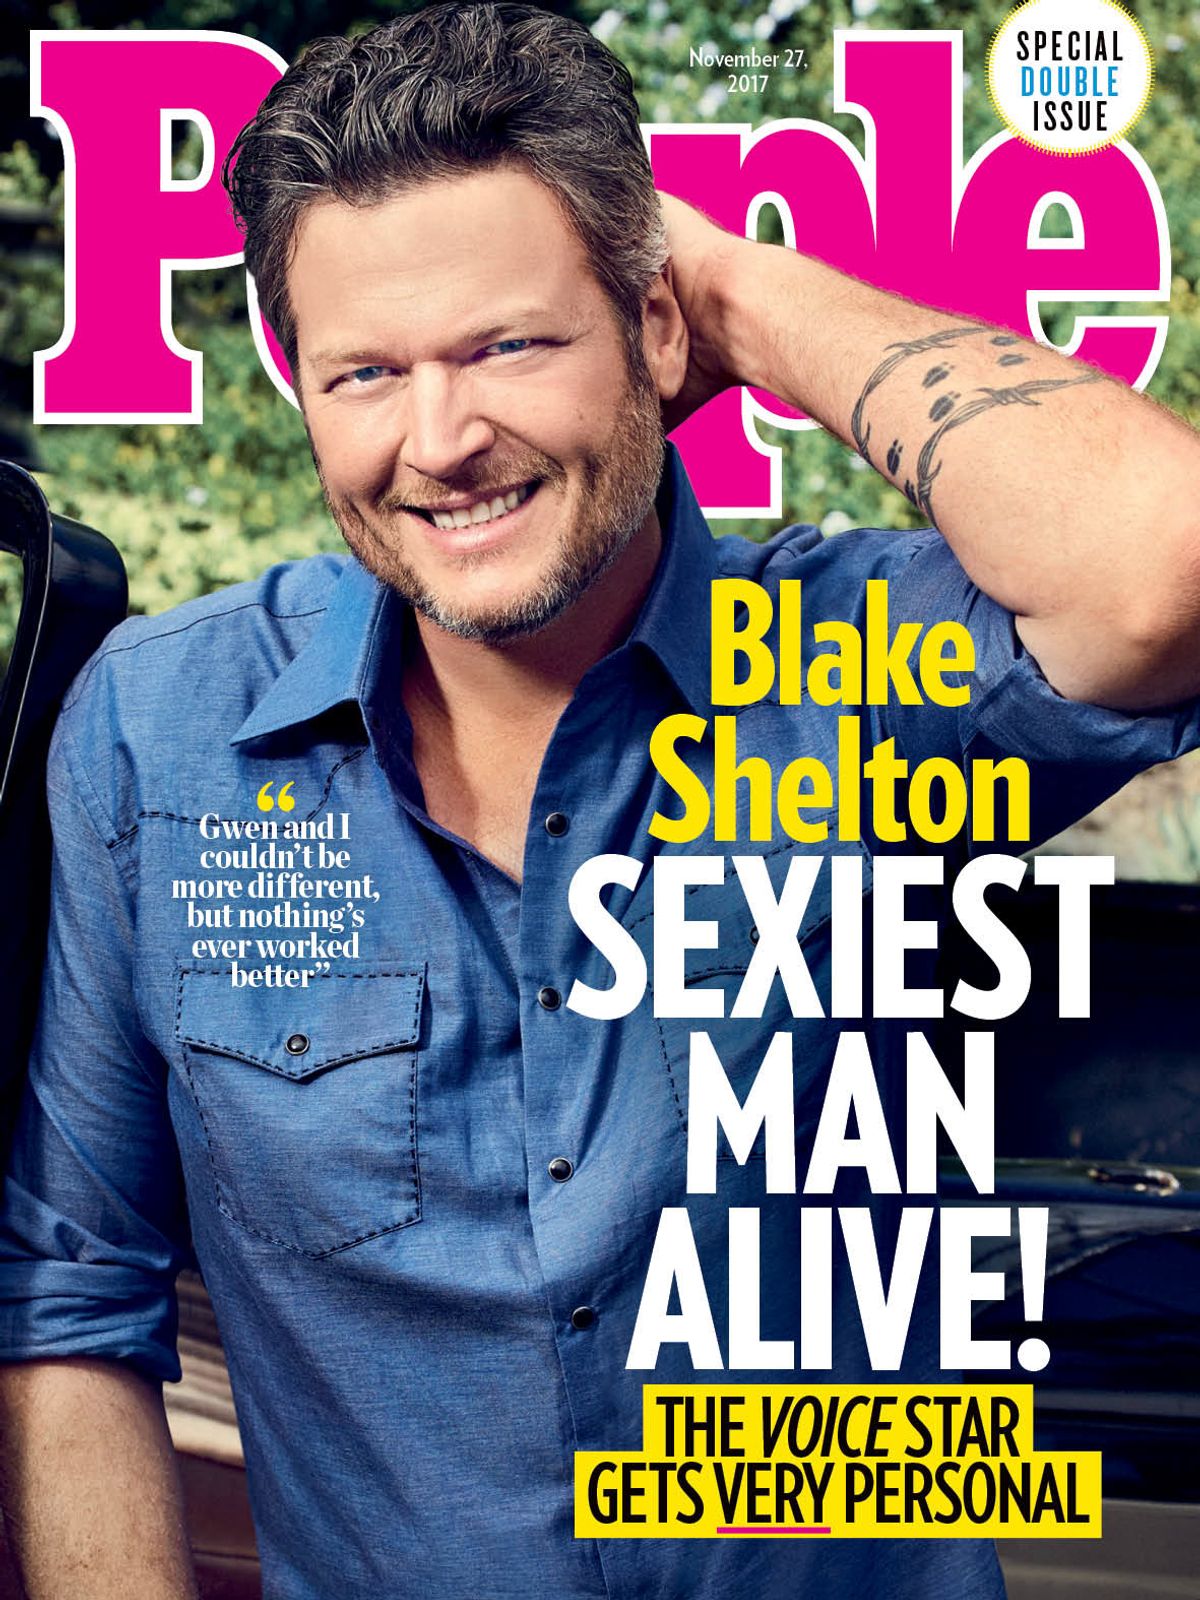 10 Reasons Blake Shelton Is The Sexiest Man Alive